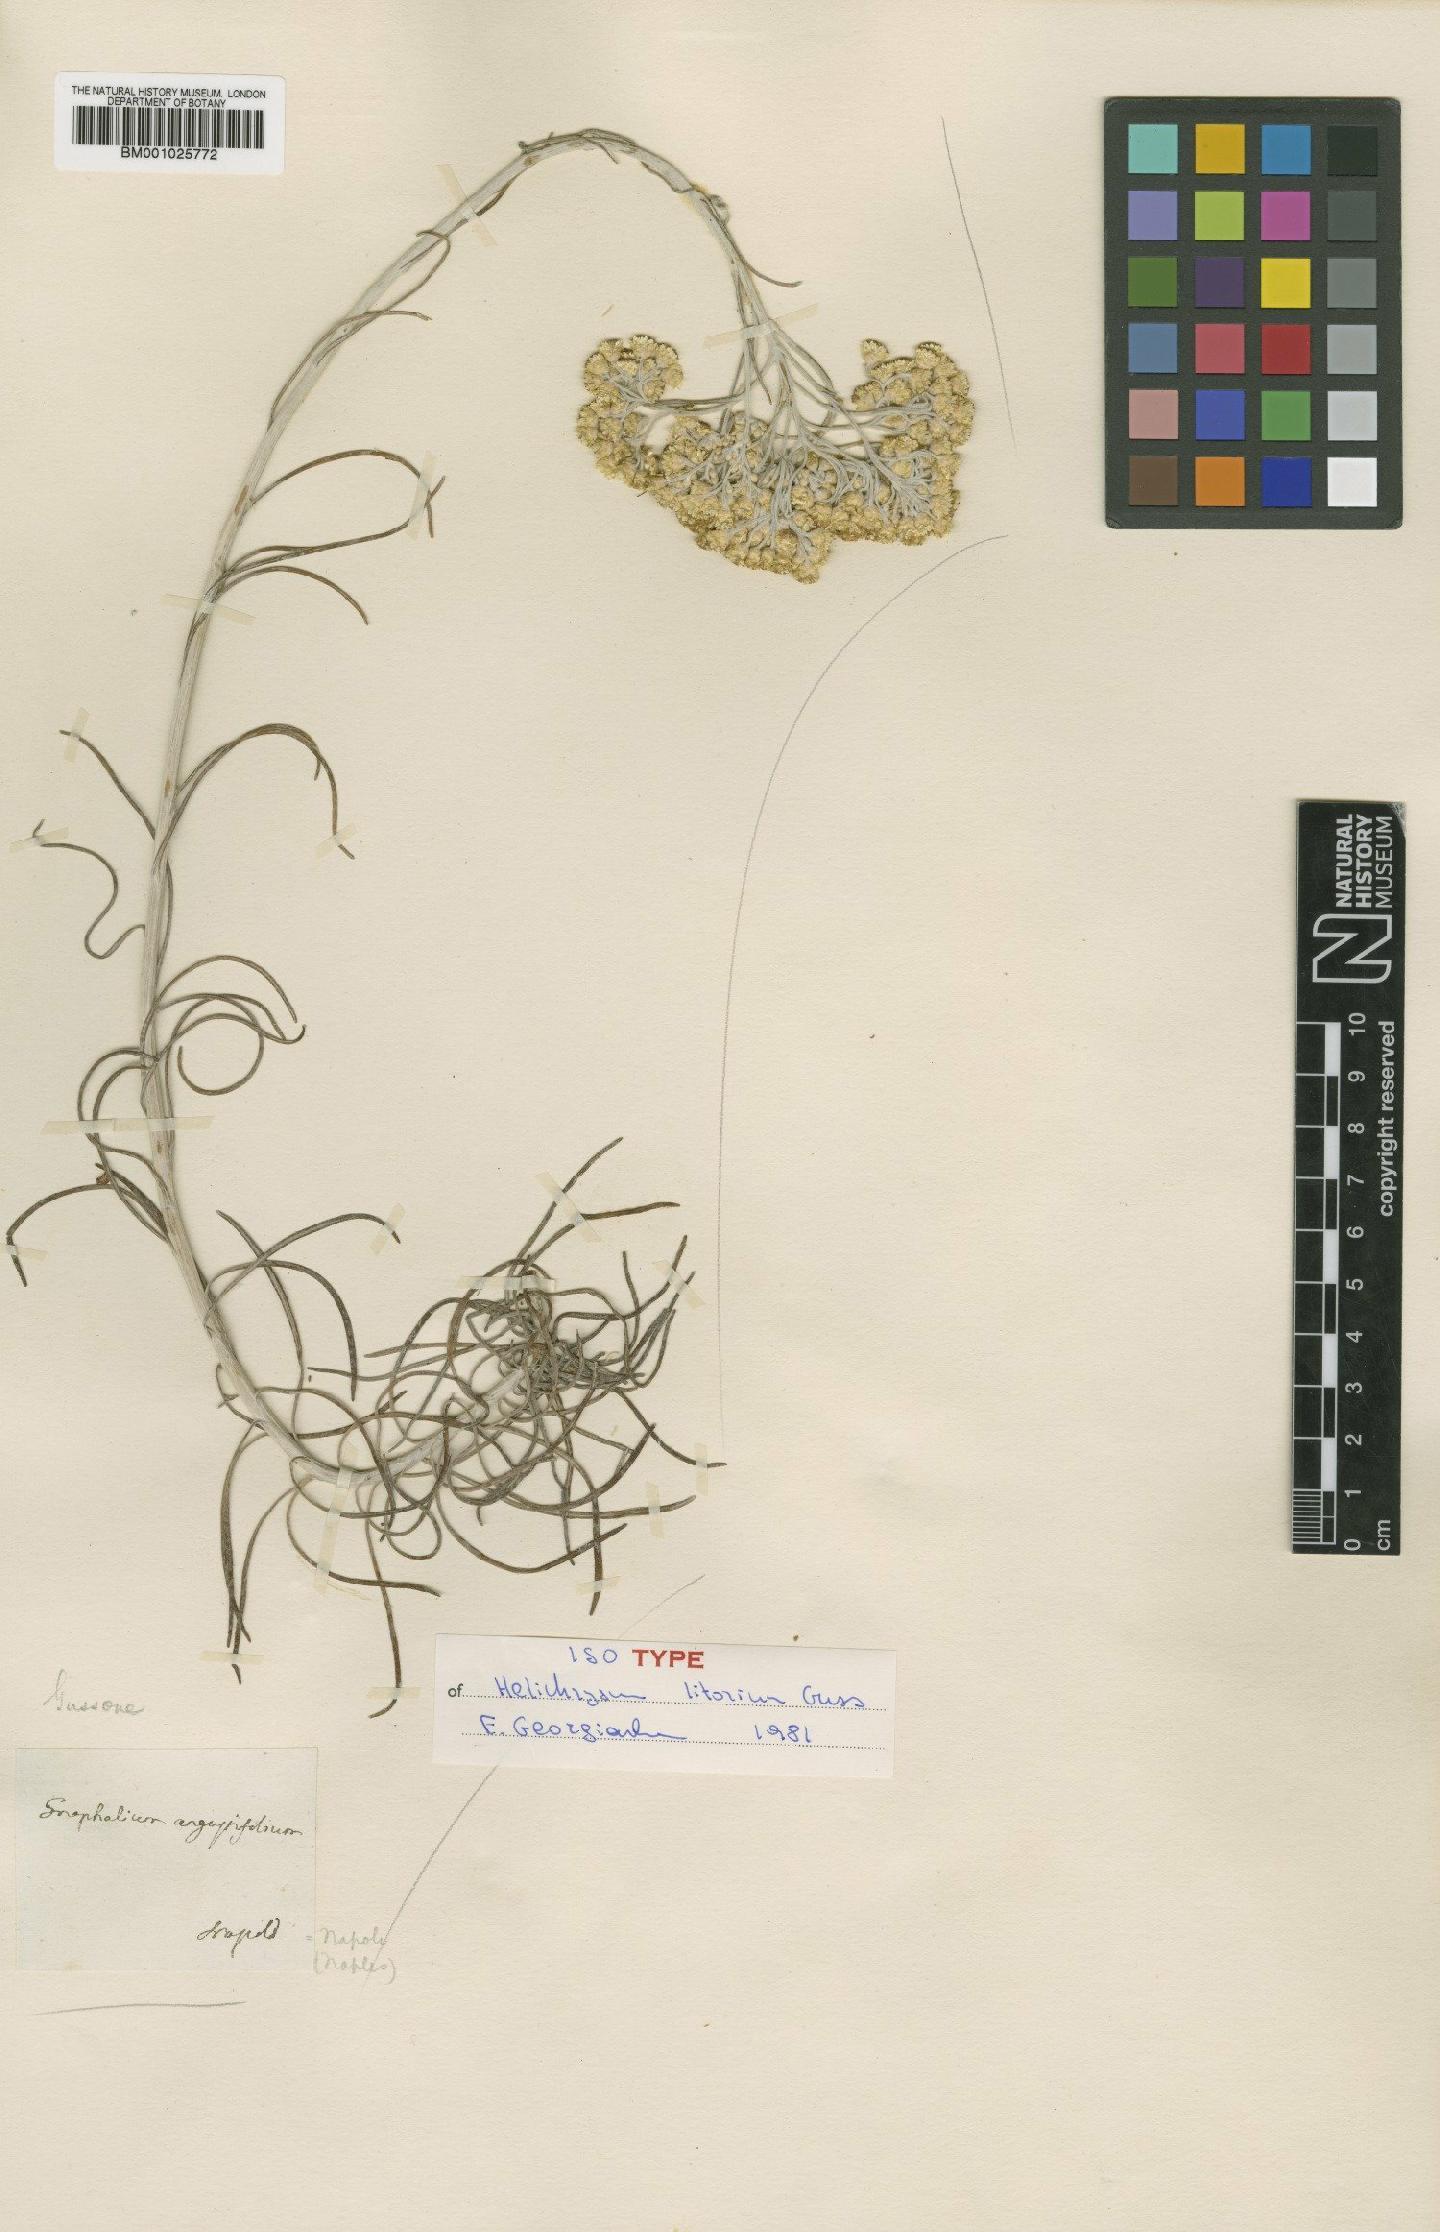 To NHMUK collection (Helichrysum litoreum Guss.; Isotype; NHMUK:ecatalogue:1304864)